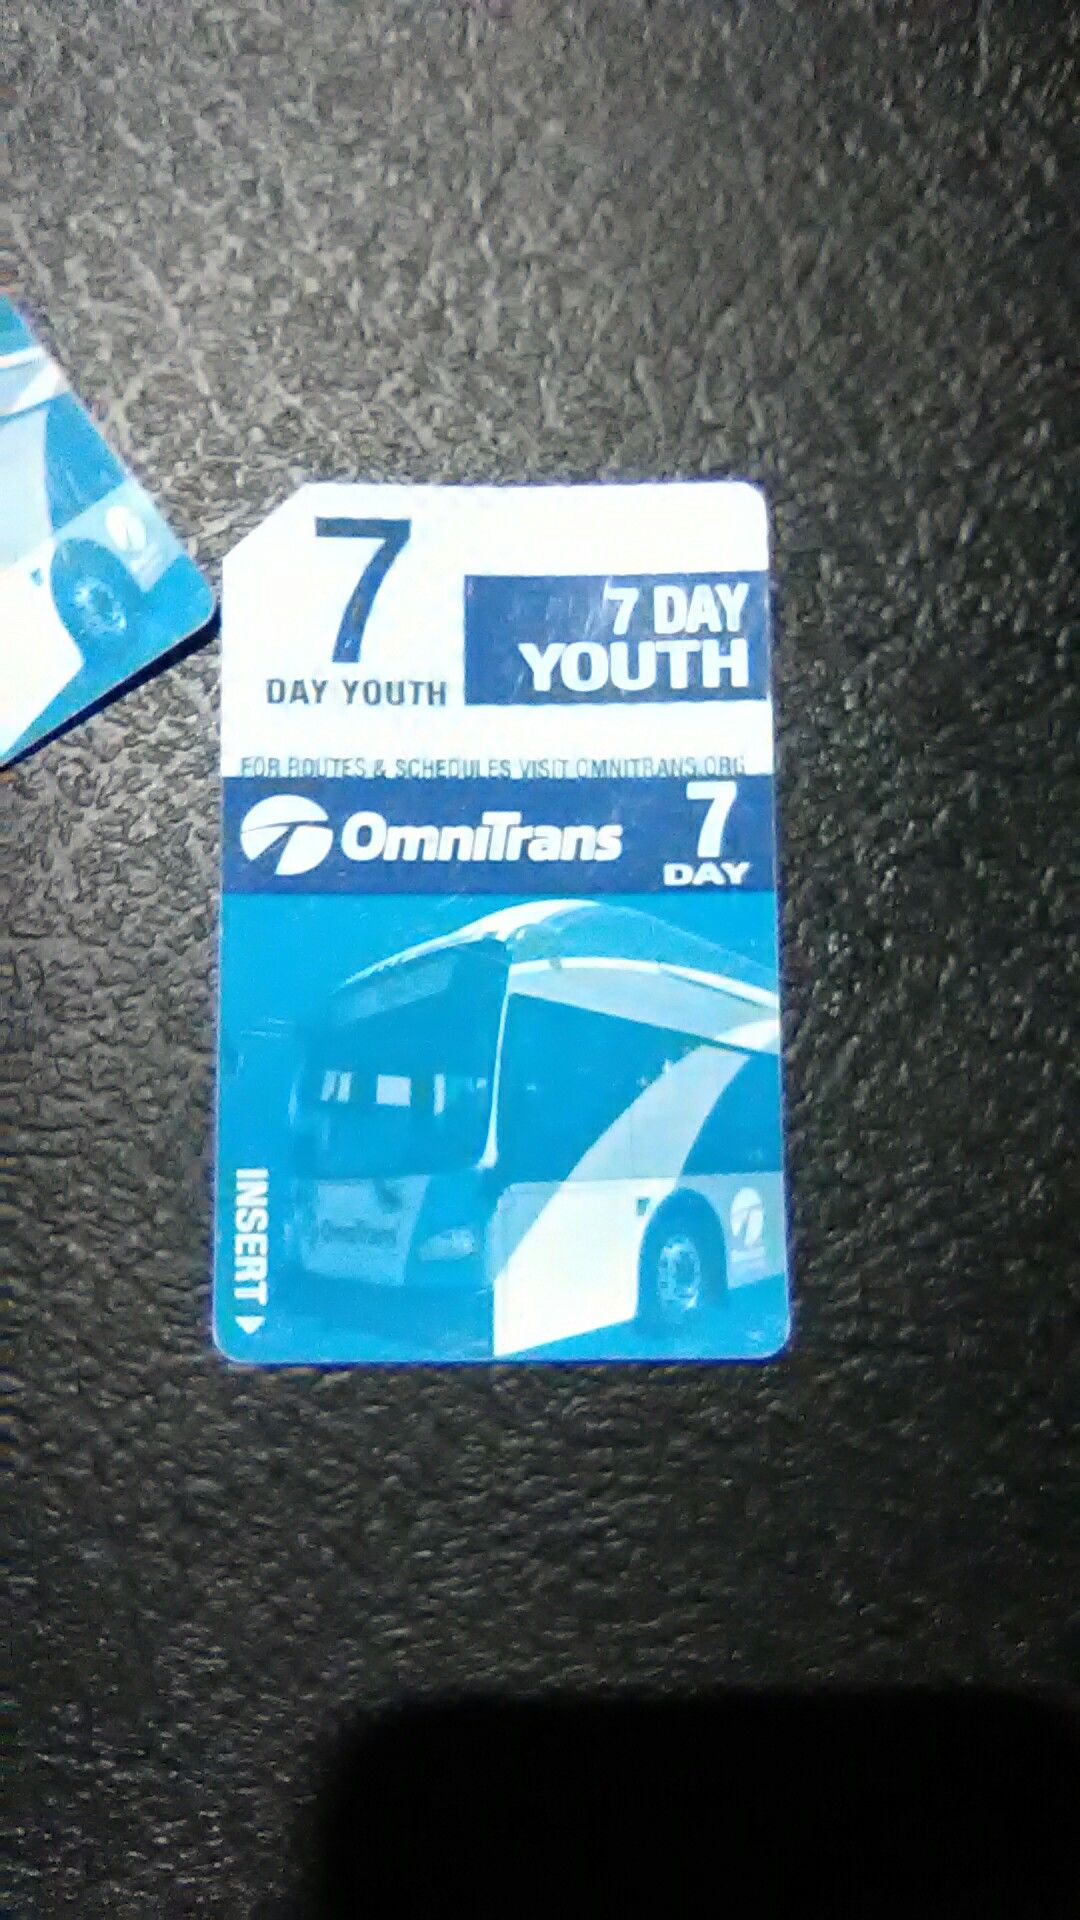 BUS PASS 7 DAY YOUTH